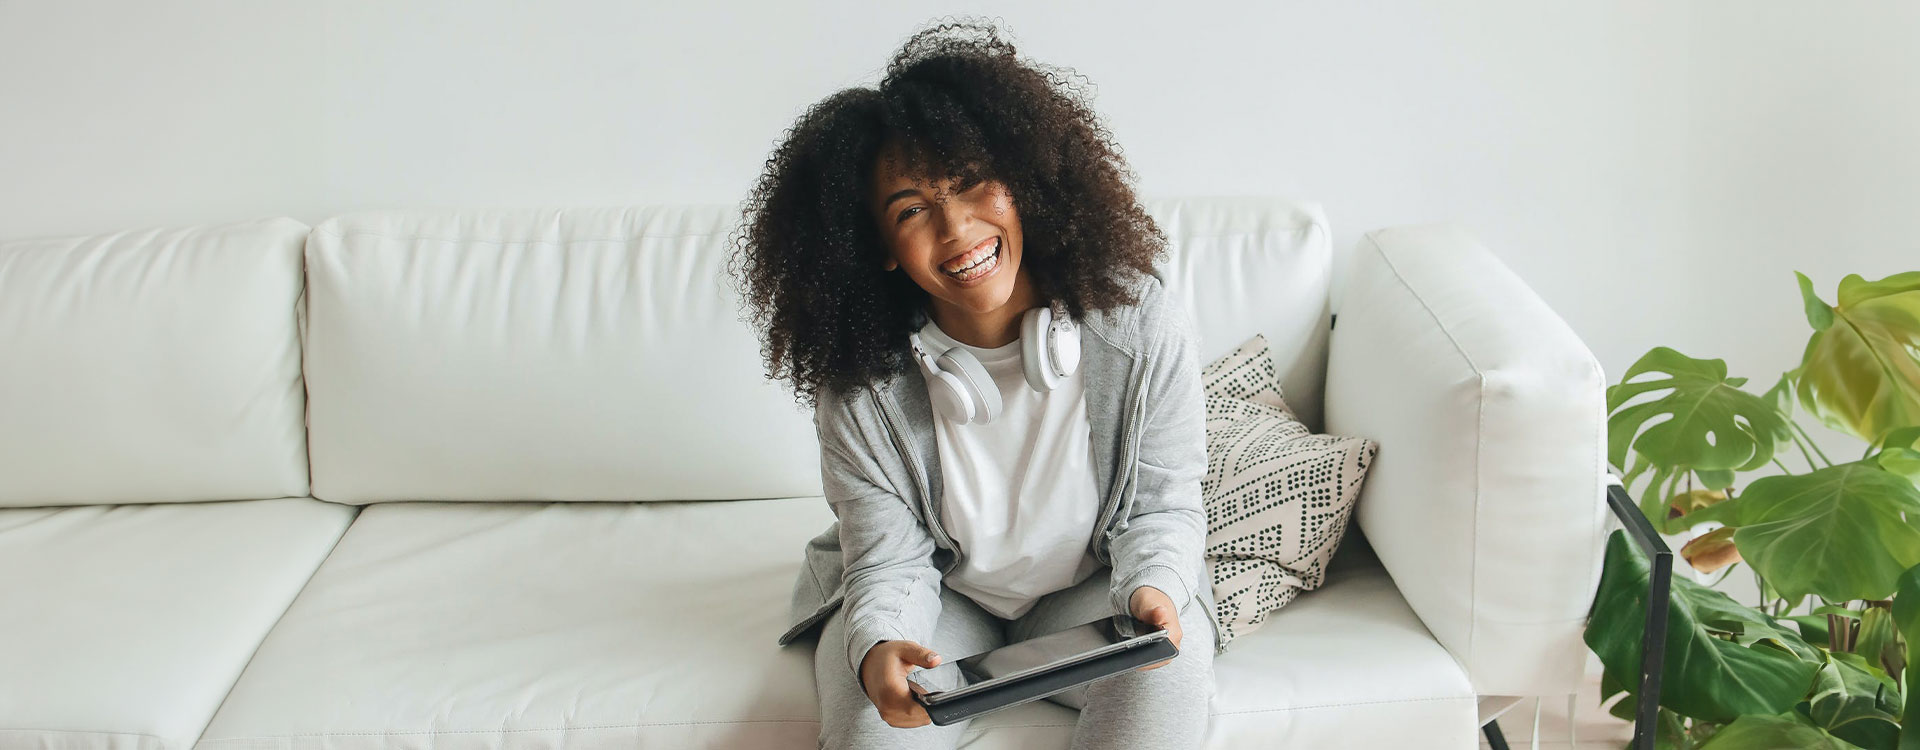 Photo of a black woman sitting in the couch with a relaxed and happy expression after reading our anxiety ebook. This represents how you can overcome stress and anxiety and feel better and more connected with yourself.